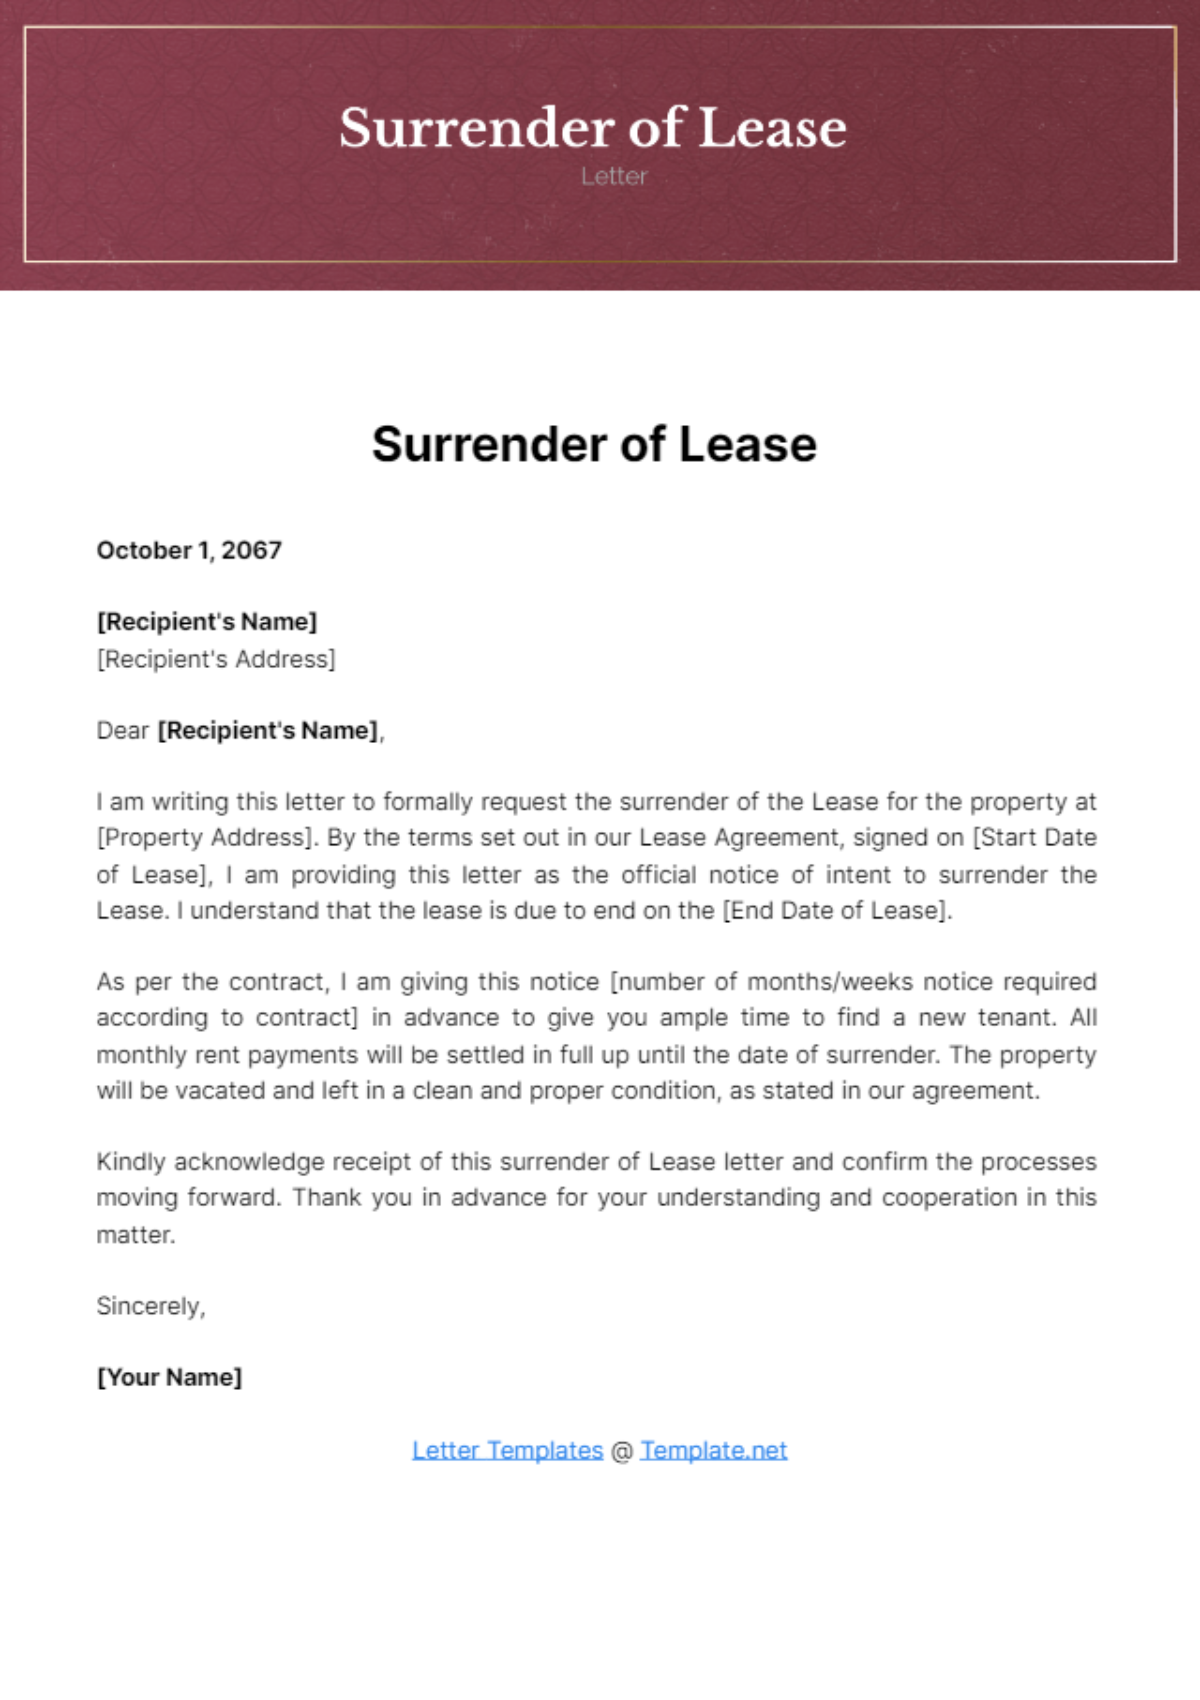 Surrender of Lease Letter Template